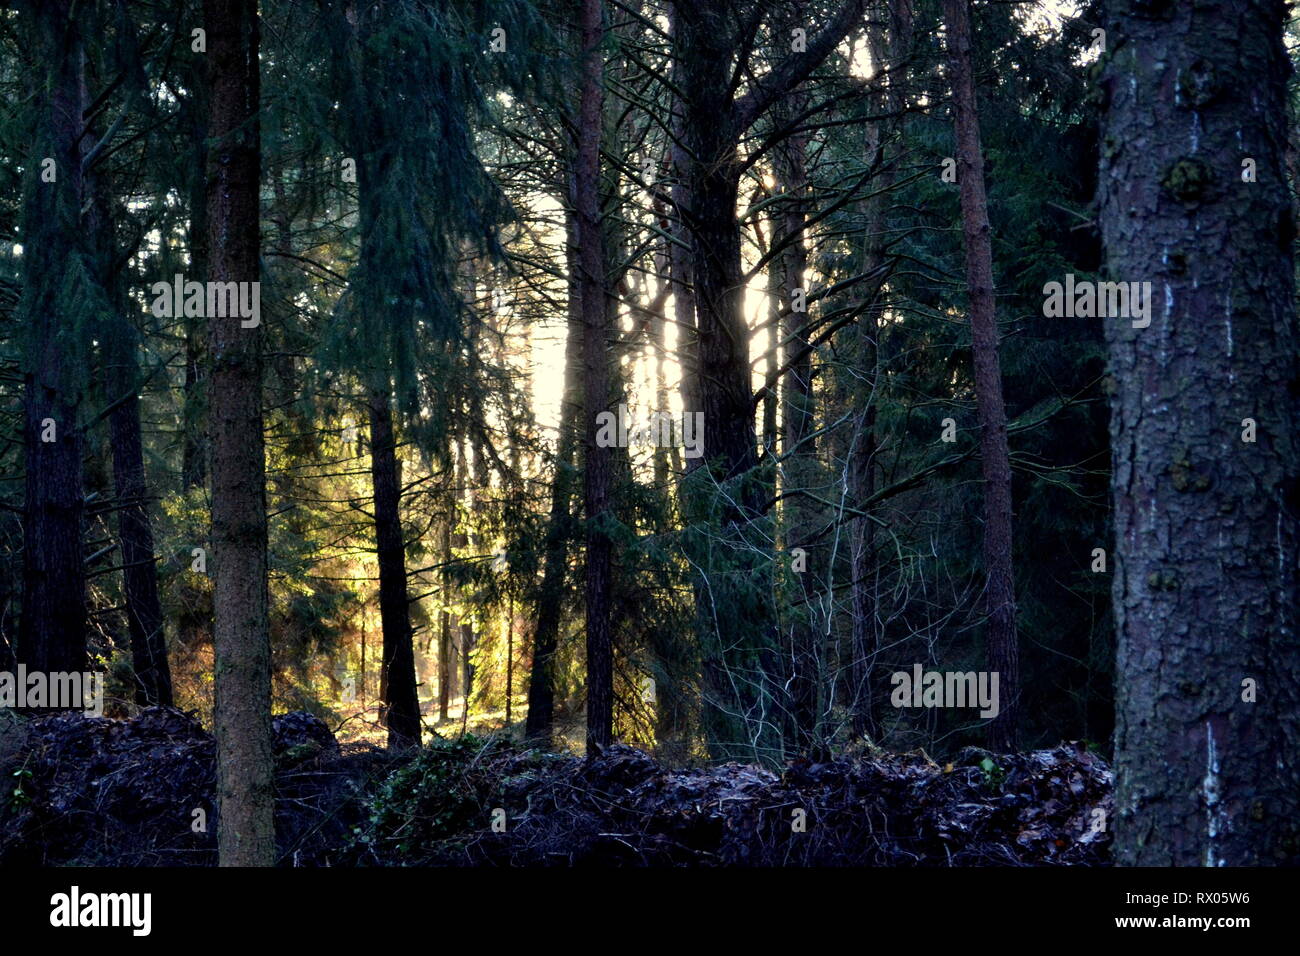 Magical Forest Sunlight and Shadows Stock Photo